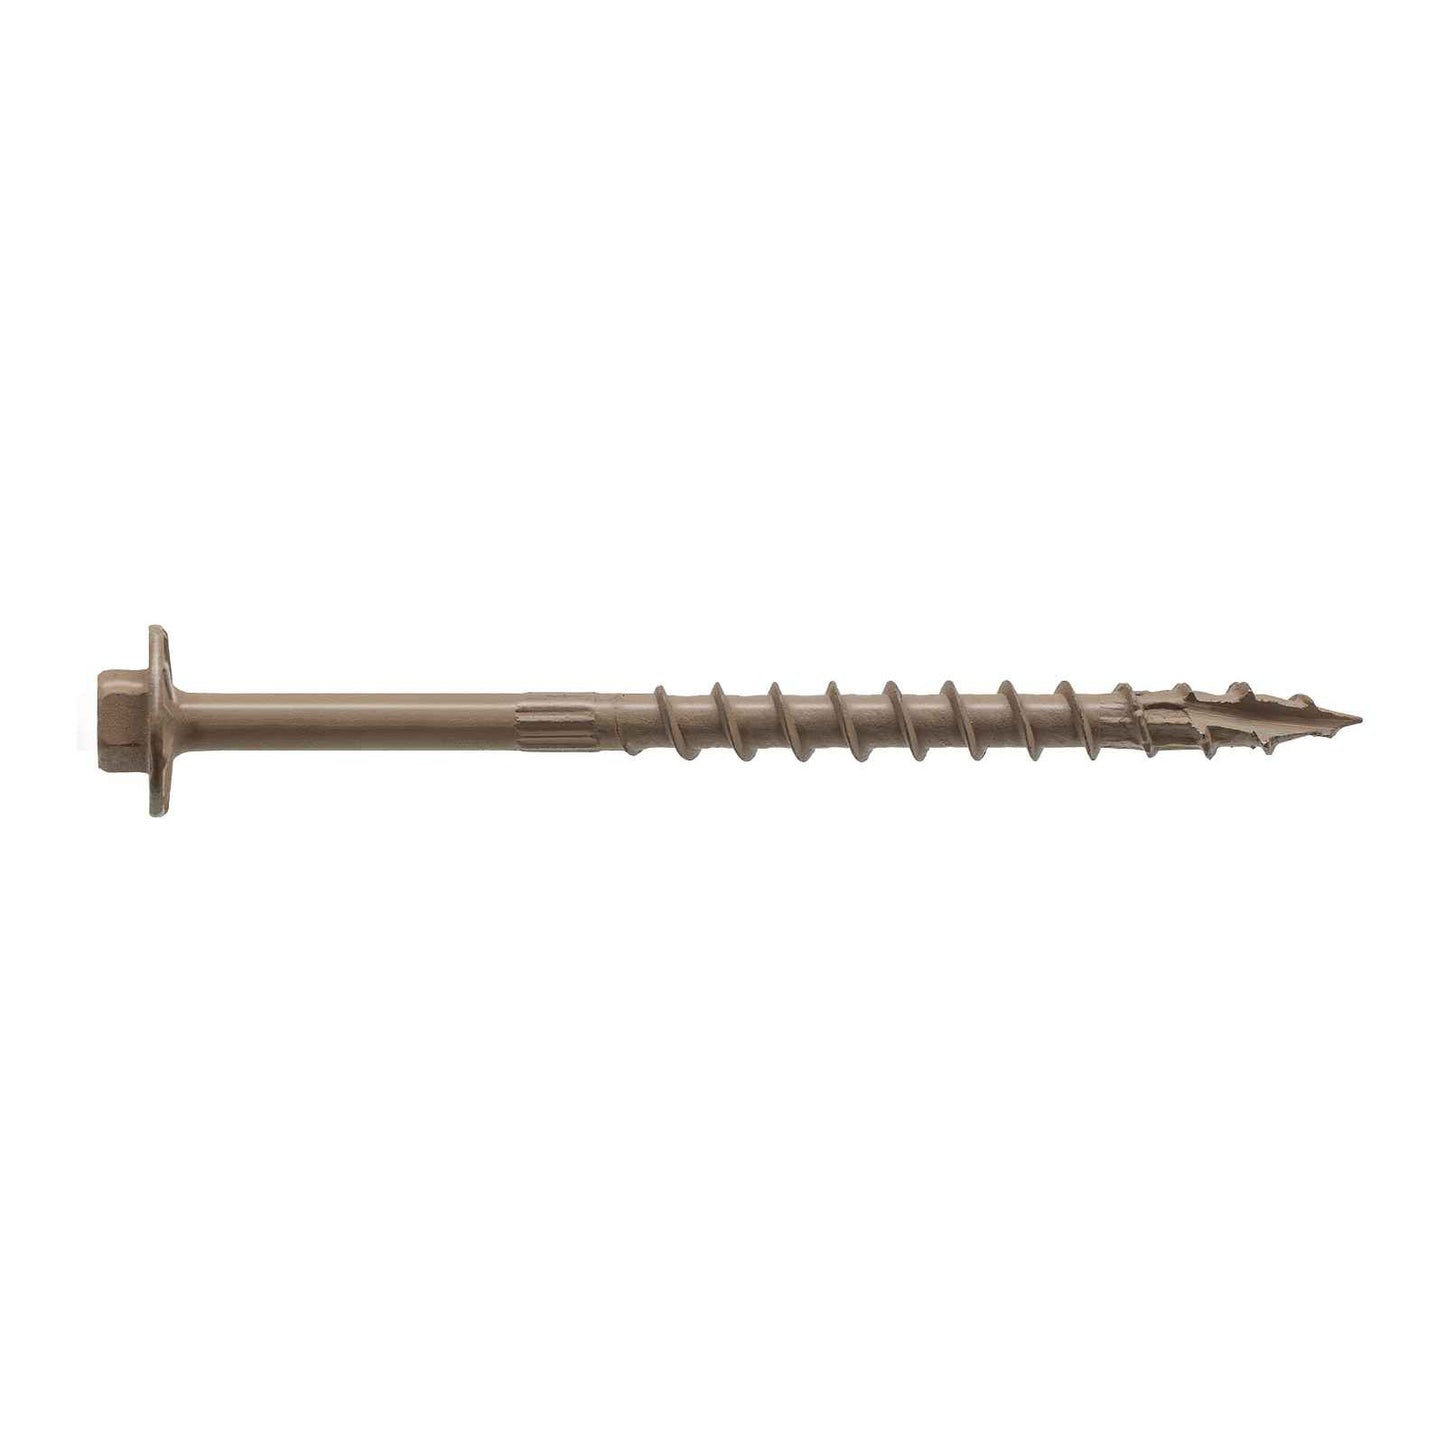 0.195" x 4" Strong-Tie SDWH19400DB-R50 Timber Hex Screw - Double Barrier Coating